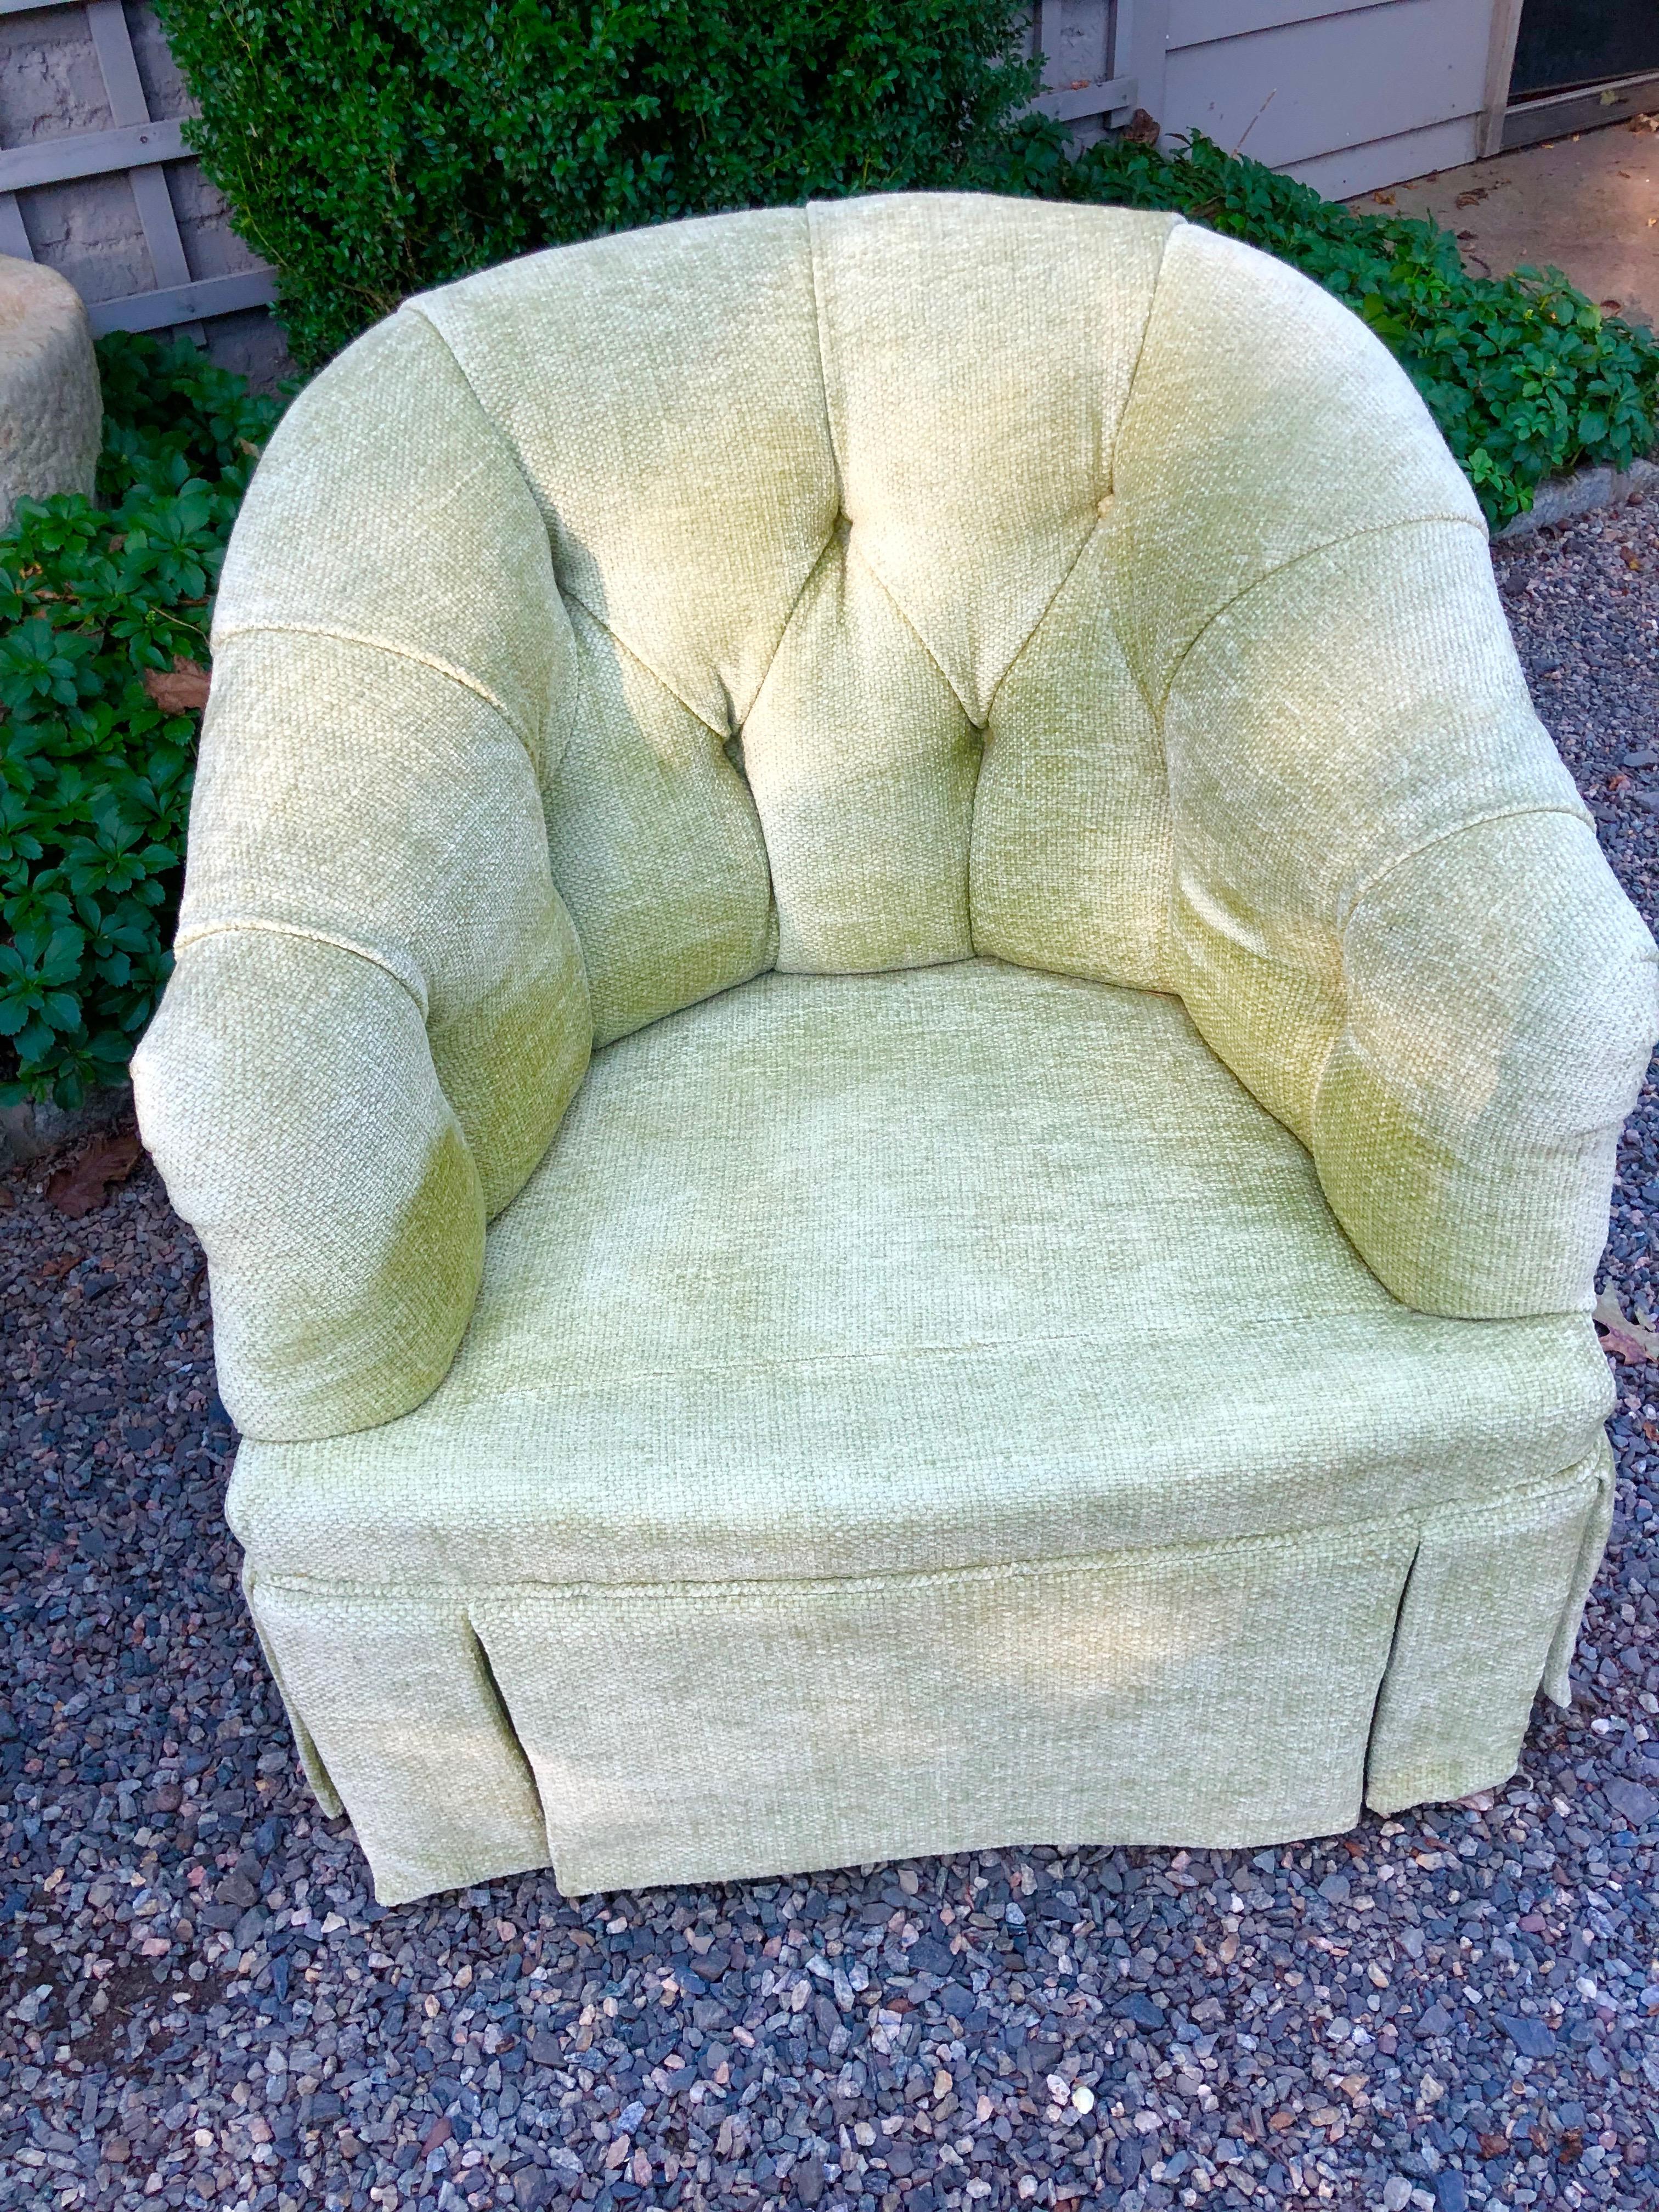 Elegant pair of vintage club chairs attributed to Baker. Newly upholstered in a wonderful shade of pale green chenille. Tailored box pleat and tufted back. Measures: Seat interior depth is 21.5.